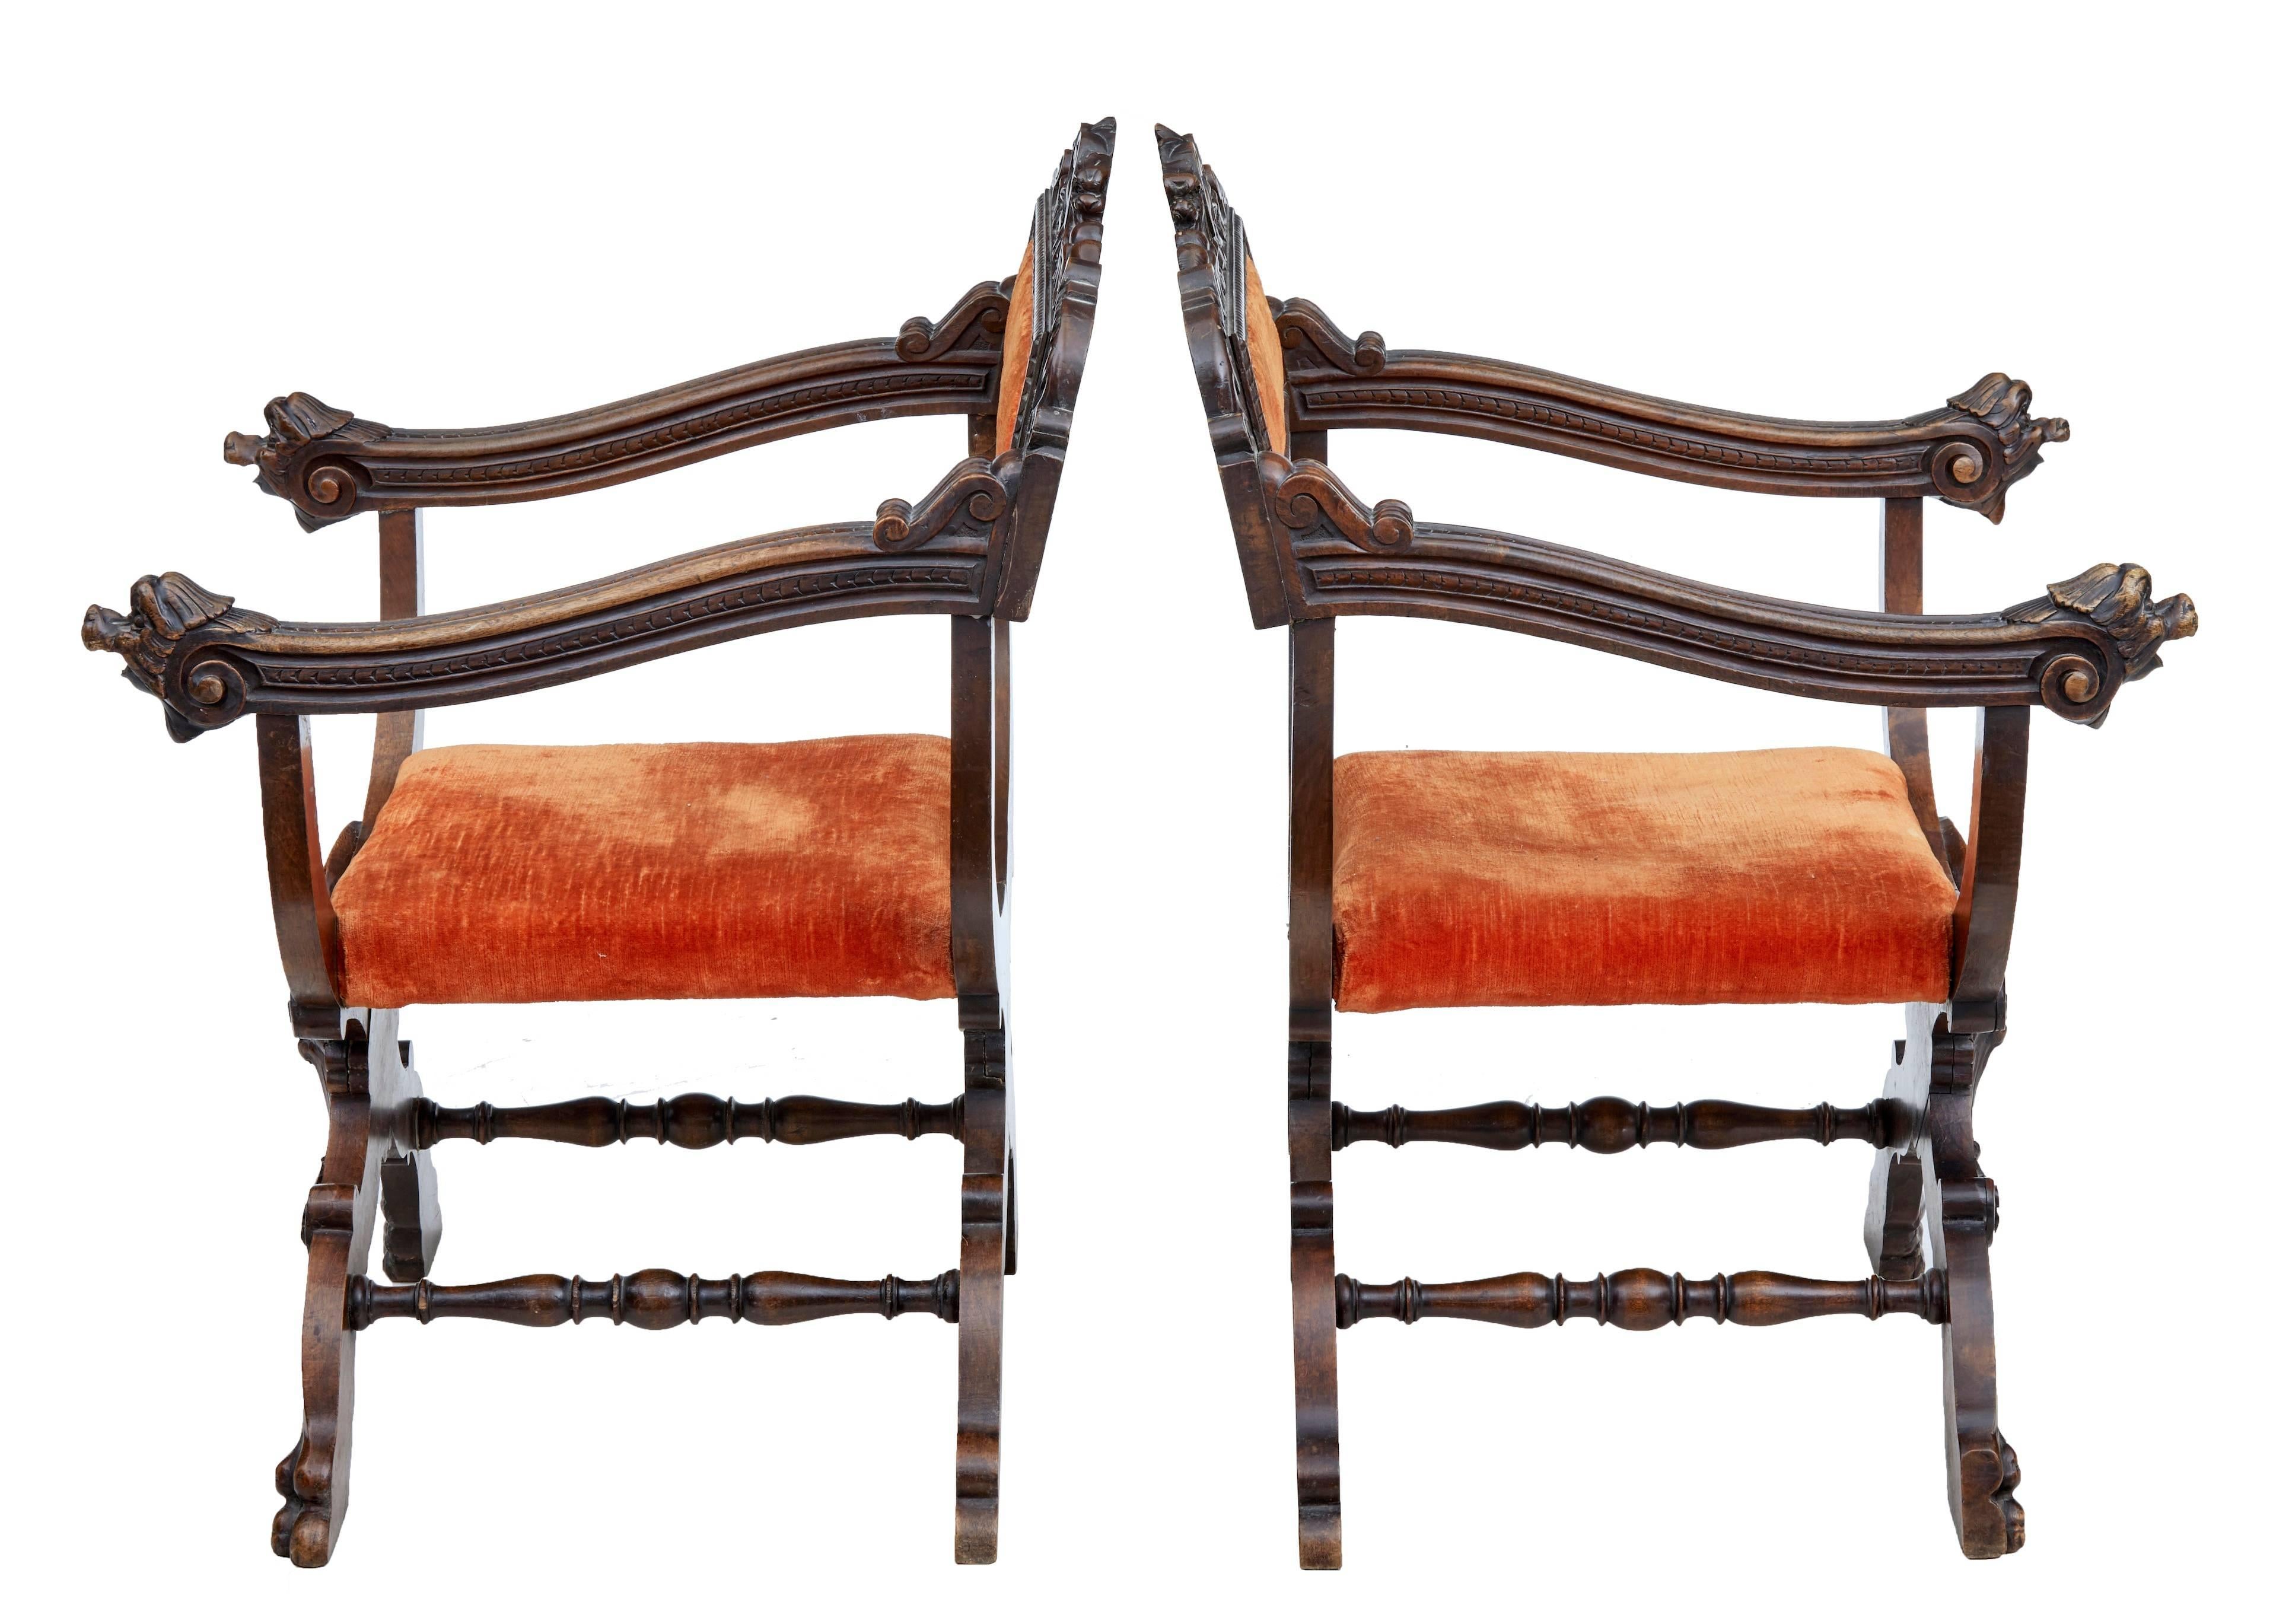 Good quality pair of Italian walnut chairs of small proportions, circa 1880.
Profusely carved with lions masks and grotesques.
Carved backrest with stud work upholstery.
X frame savonarola shape, joined by turned stretchers.
One loss to carving